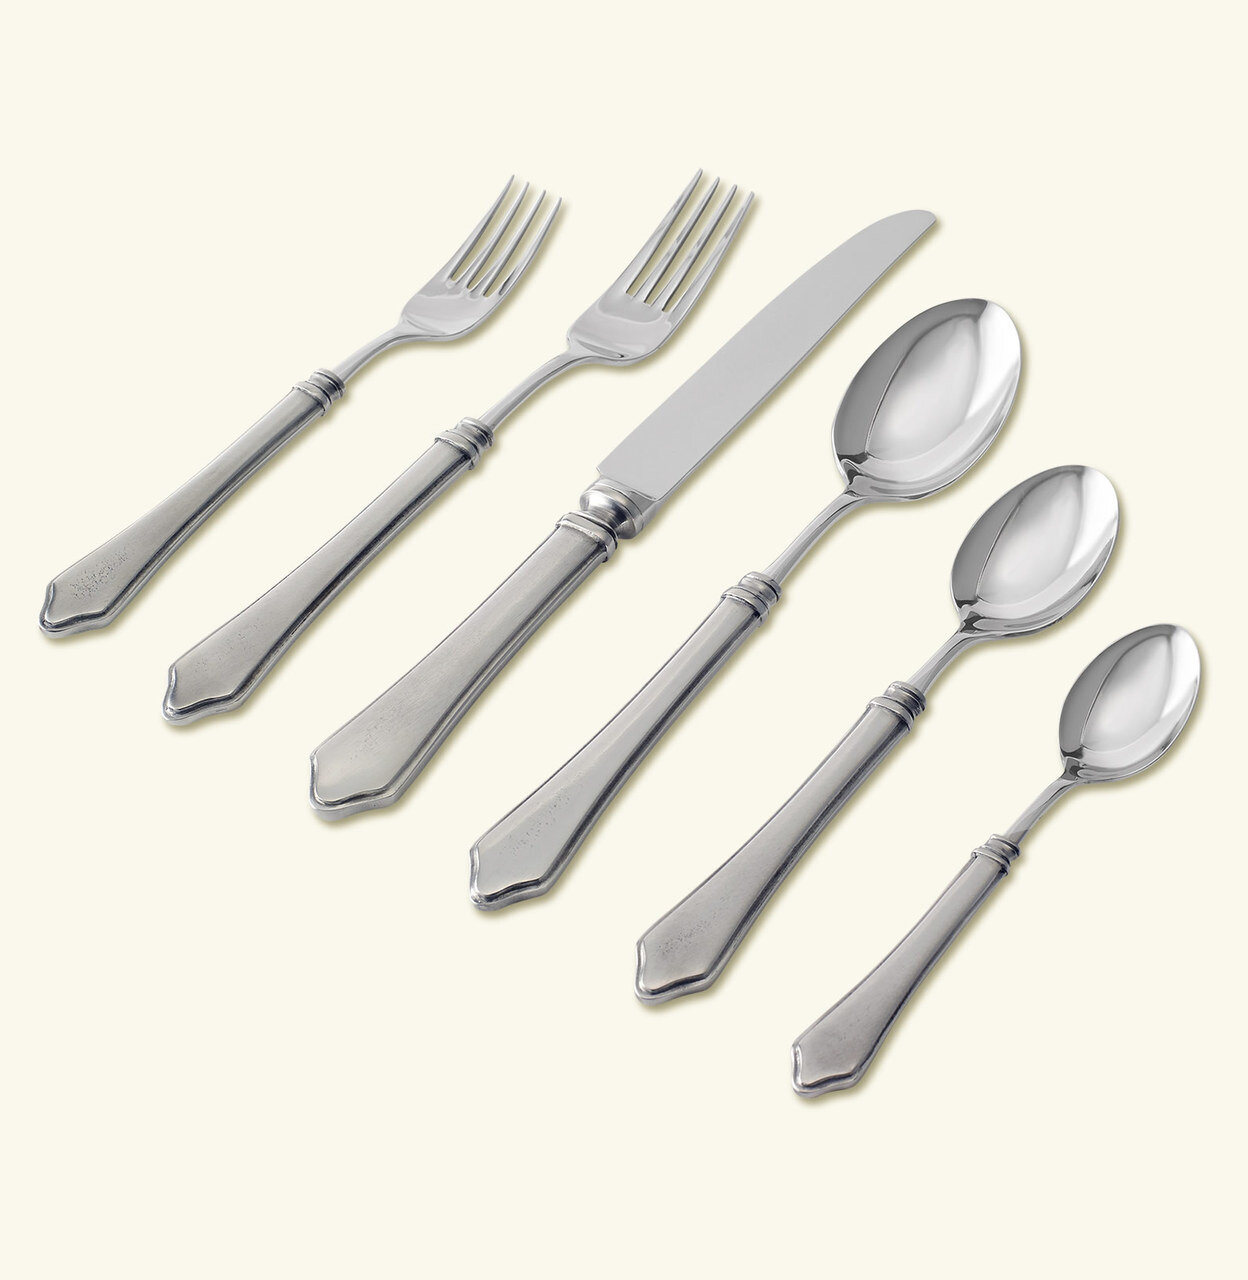 Match Pewter 6 Piece Place Setting With Forged Blade